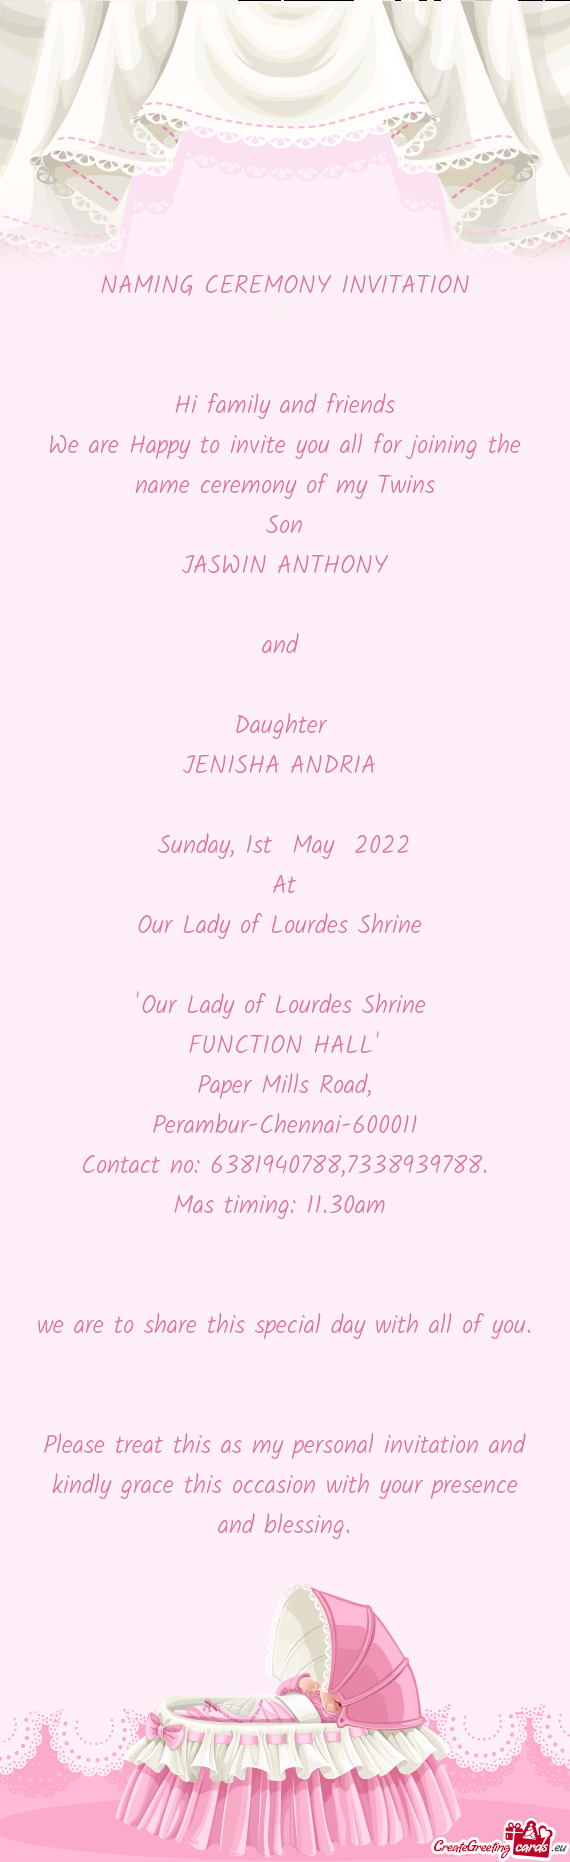 We are Happy to invite you all for joining the name ceremony of my Twins